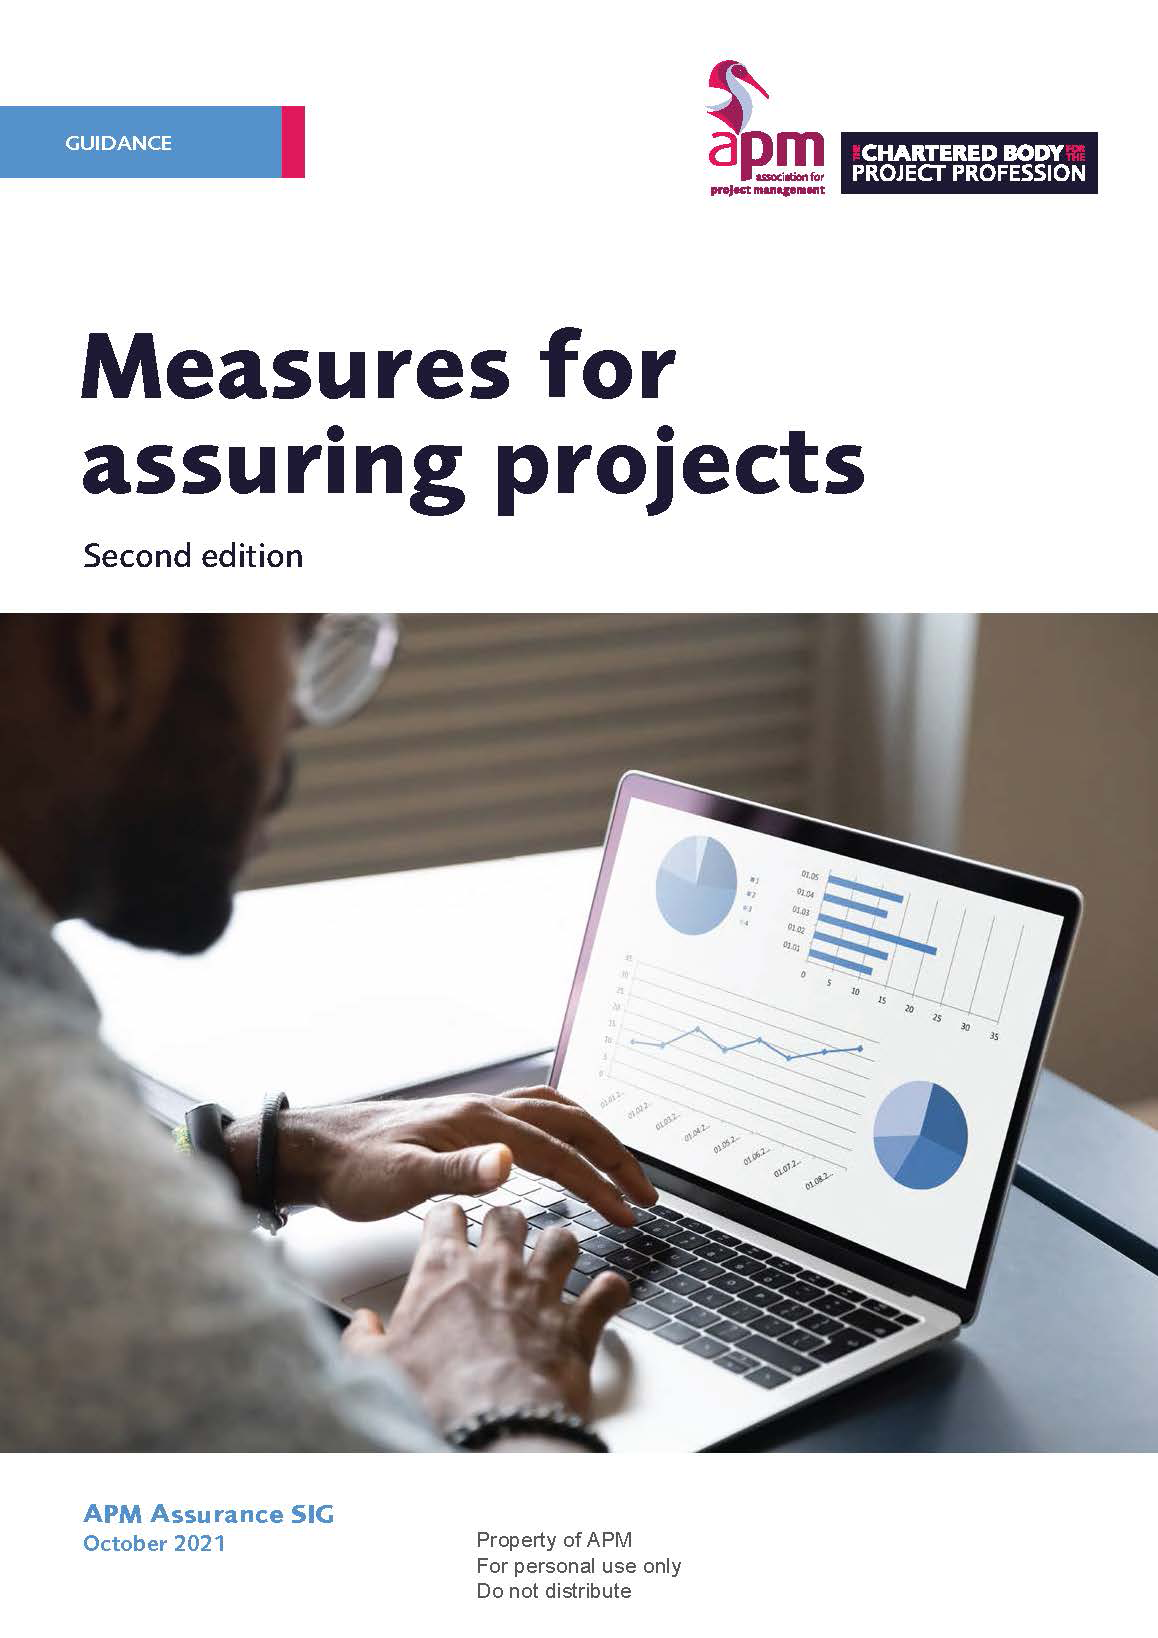 Measures for assuring projects